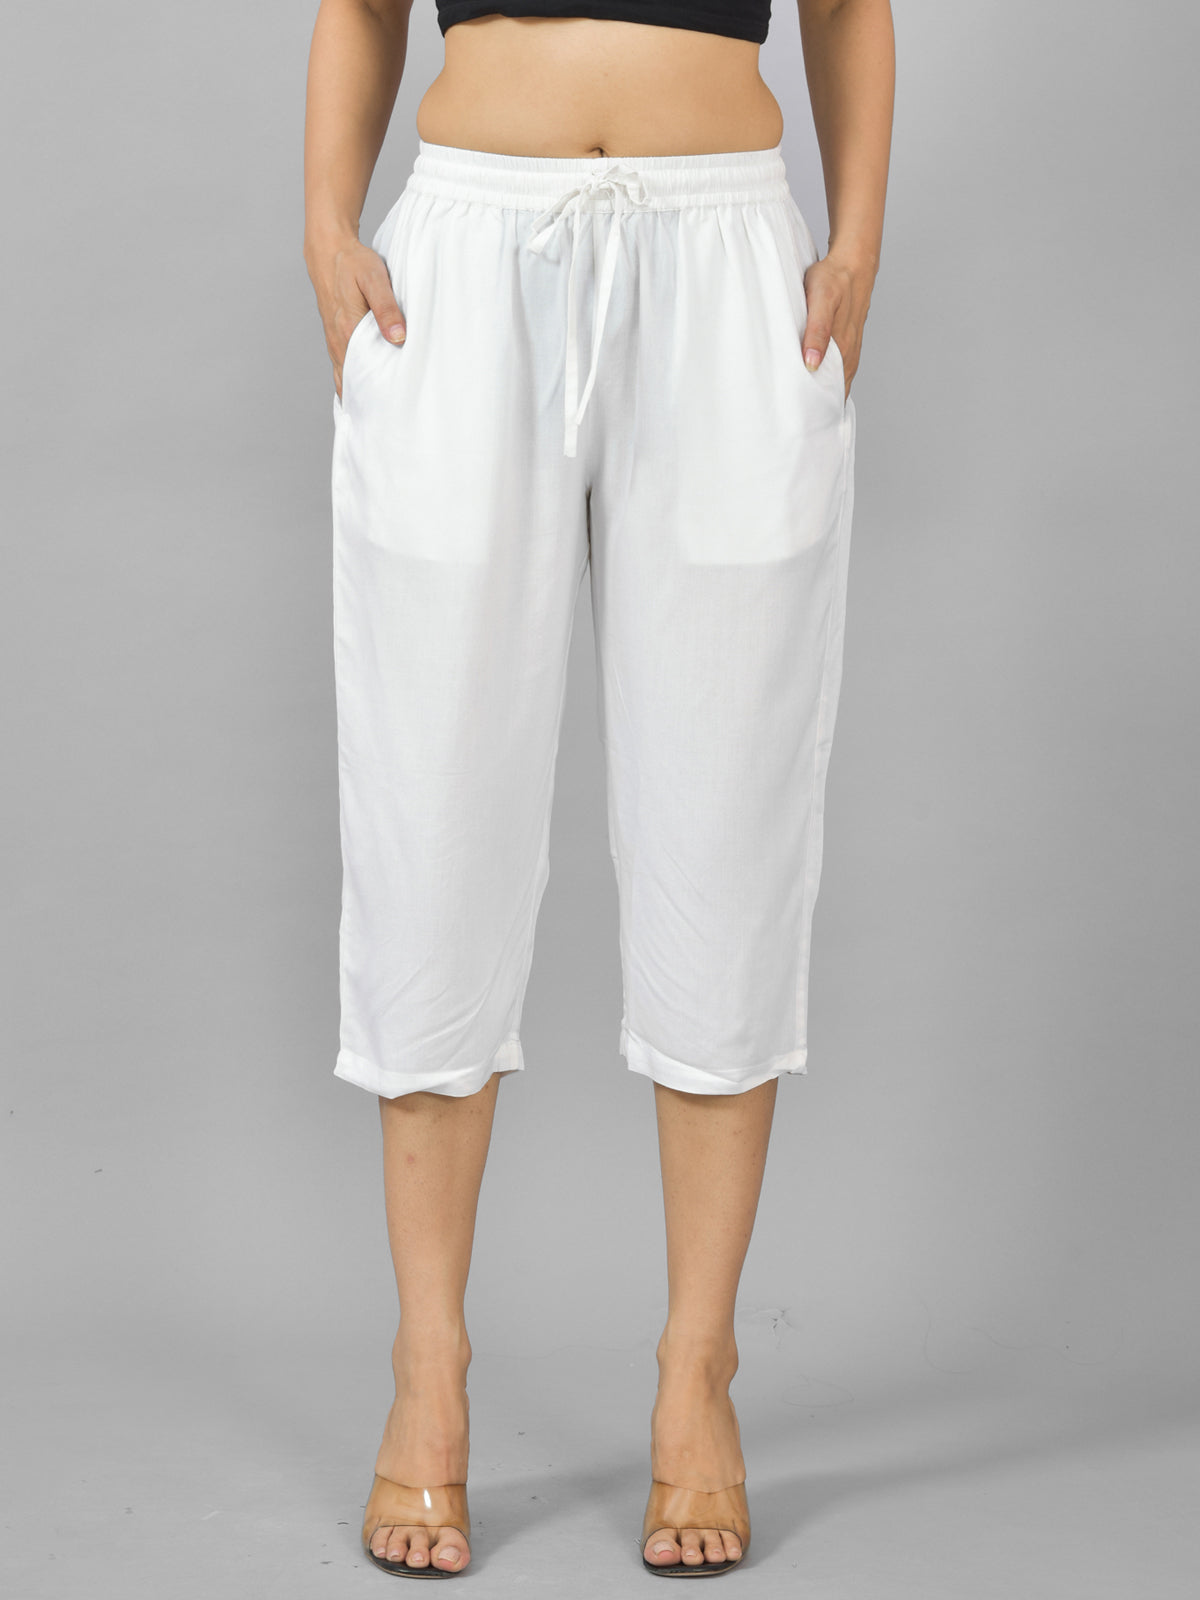 Pack Of 2 Womens Black And White Calf Length Rayon Culottes Trouser Combo